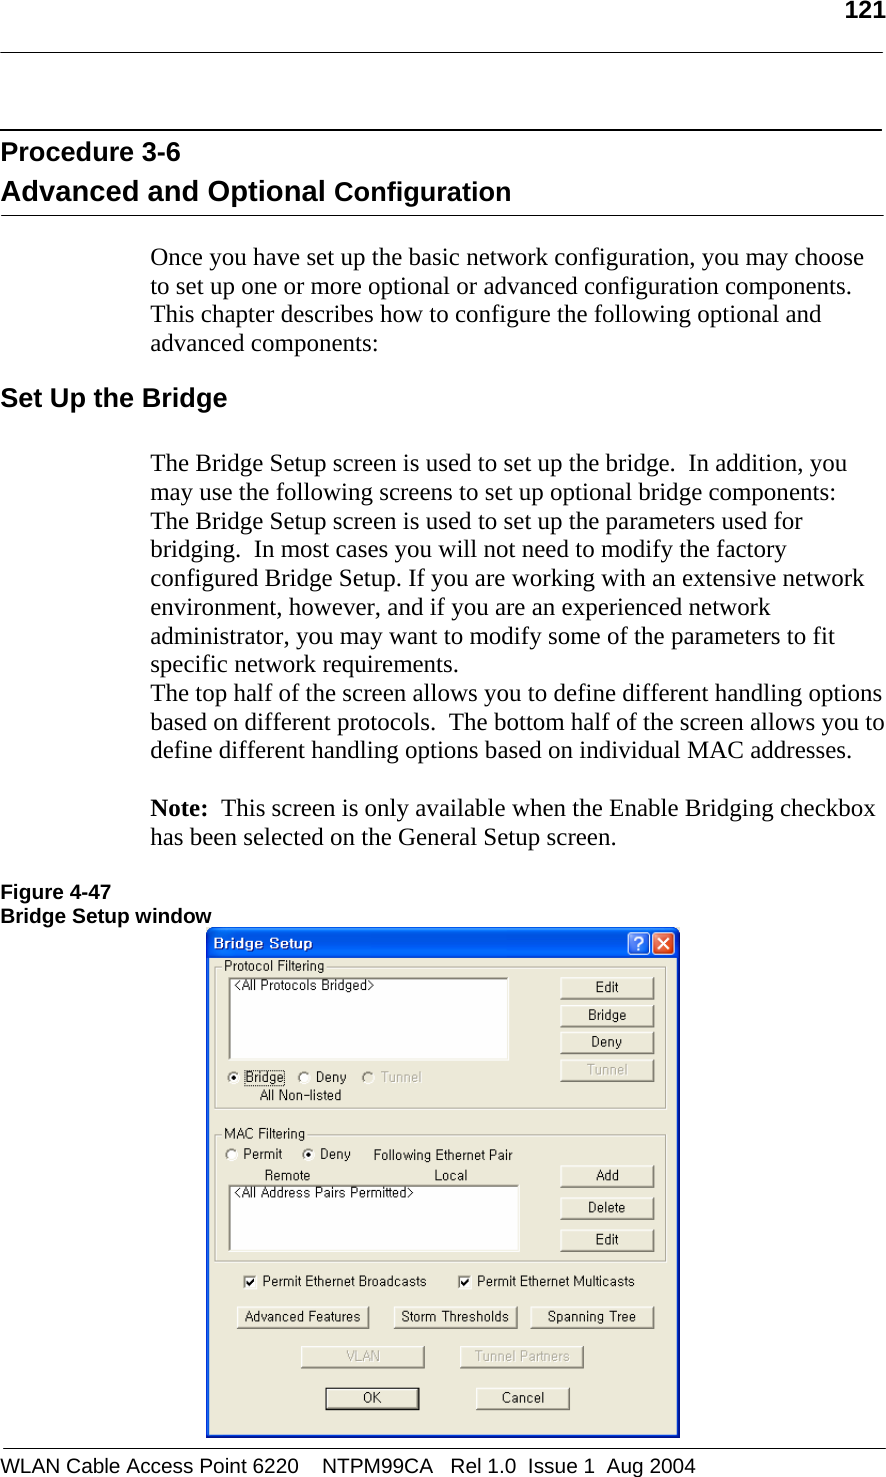   121   Procedure 3-6  Advanced and Optional Configuration  Once you have set up the basic network configuration, you may choose to set up one or more optional or advanced configuration components.  This chapter describes how to configure the following optional and advanced components: Set Up the Bridge  The Bridge Setup screen is used to set up the bridge.  In addition, you may use the following screens to set up optional bridge components: The Bridge Setup screen is used to set up the parameters used for bridging.  In most cases you will not need to modify the factory configured Bridge Setup. If you are working with an extensive network environment, however, and if you are an experienced network administrator, you may want to modify some of the parameters to fit specific network requirements.  The top half of the screen allows you to define different handling options based on different protocols.  The bottom half of the screen allows you to define different handling options based on individual MAC addresses.  Note:  This screen is only available when the Enable Bridging checkbox has been selected on the General Setup screen.  Figure 4-47 Bridge Setup window  WLAN Cable Access Point 6220    NTPM99CA   Rel 1.0  Issue 1  Aug 2004 